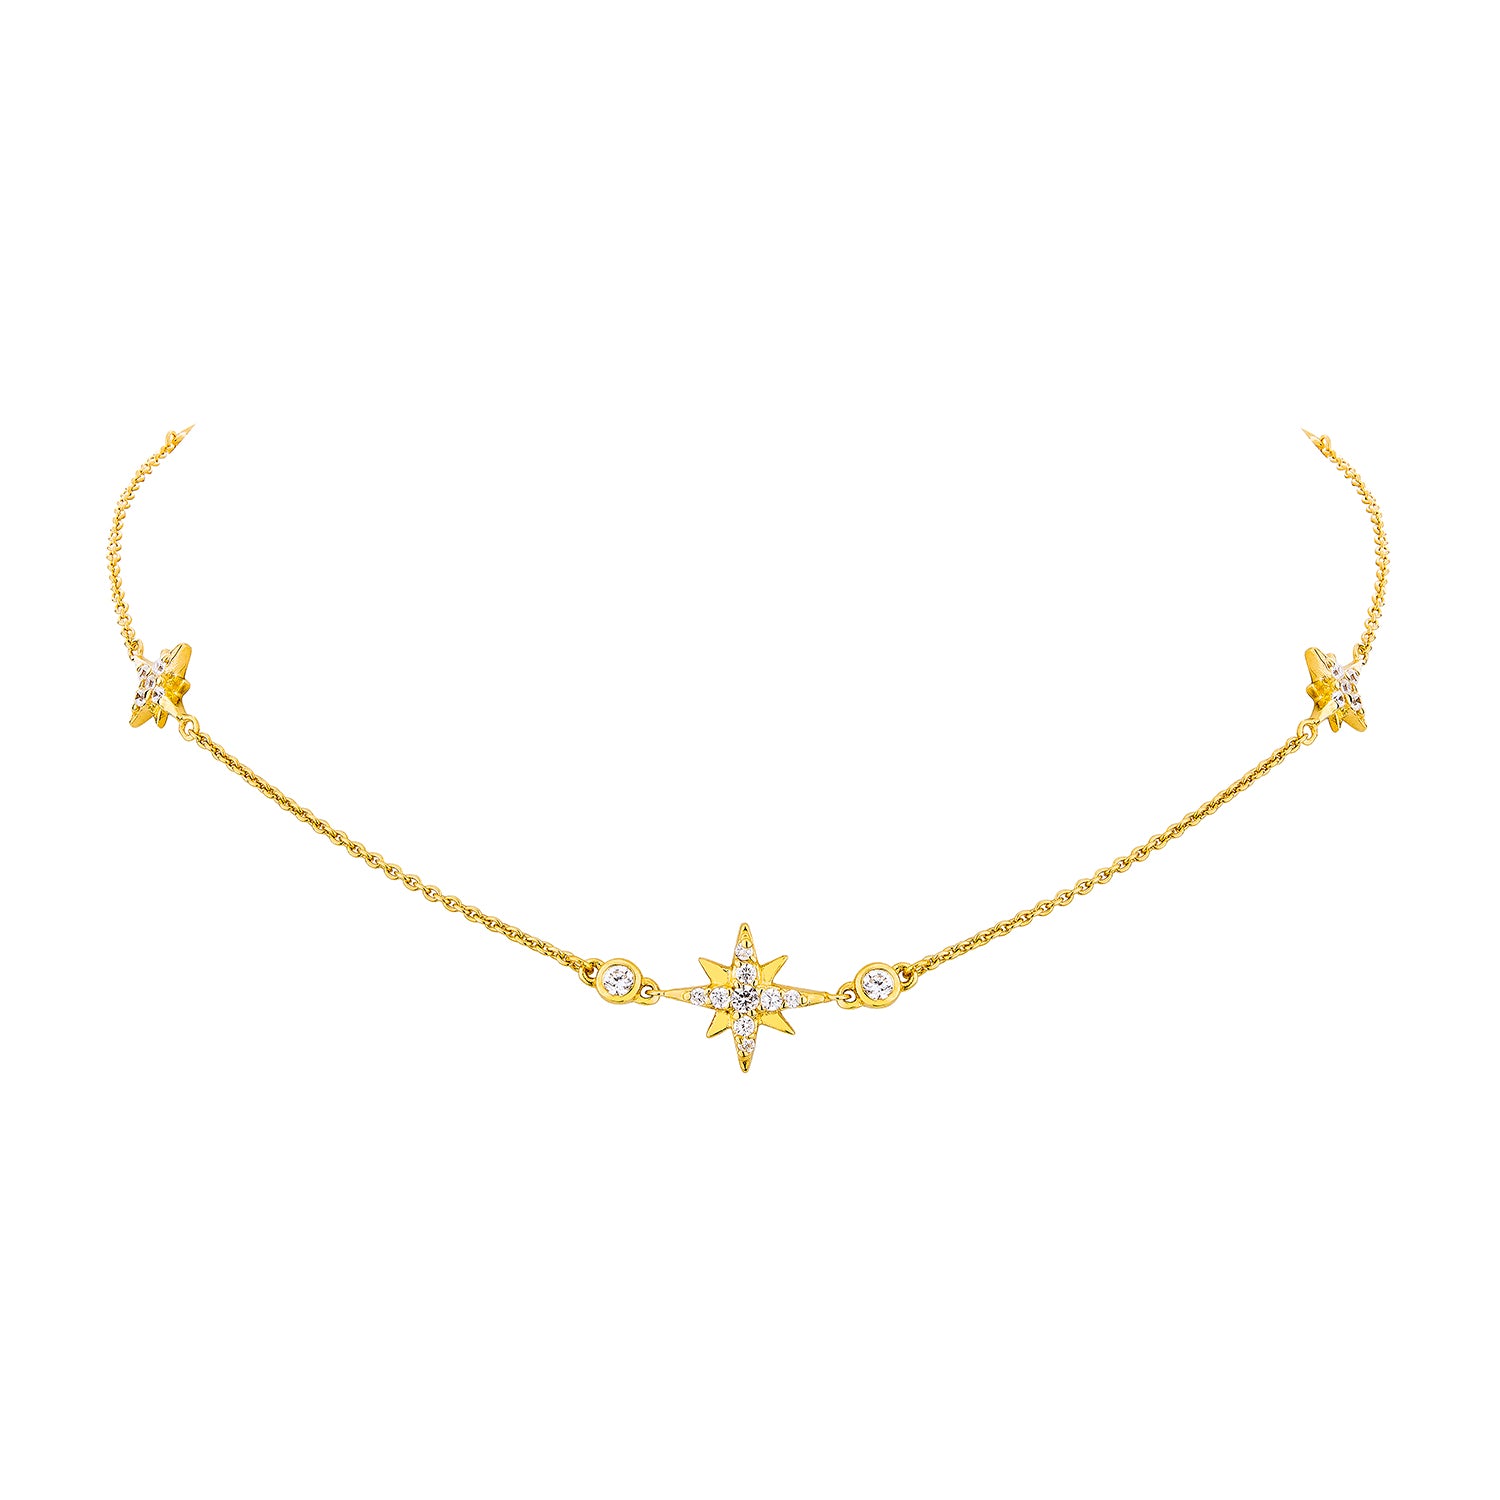 Celestial Chain Necklace – Gold